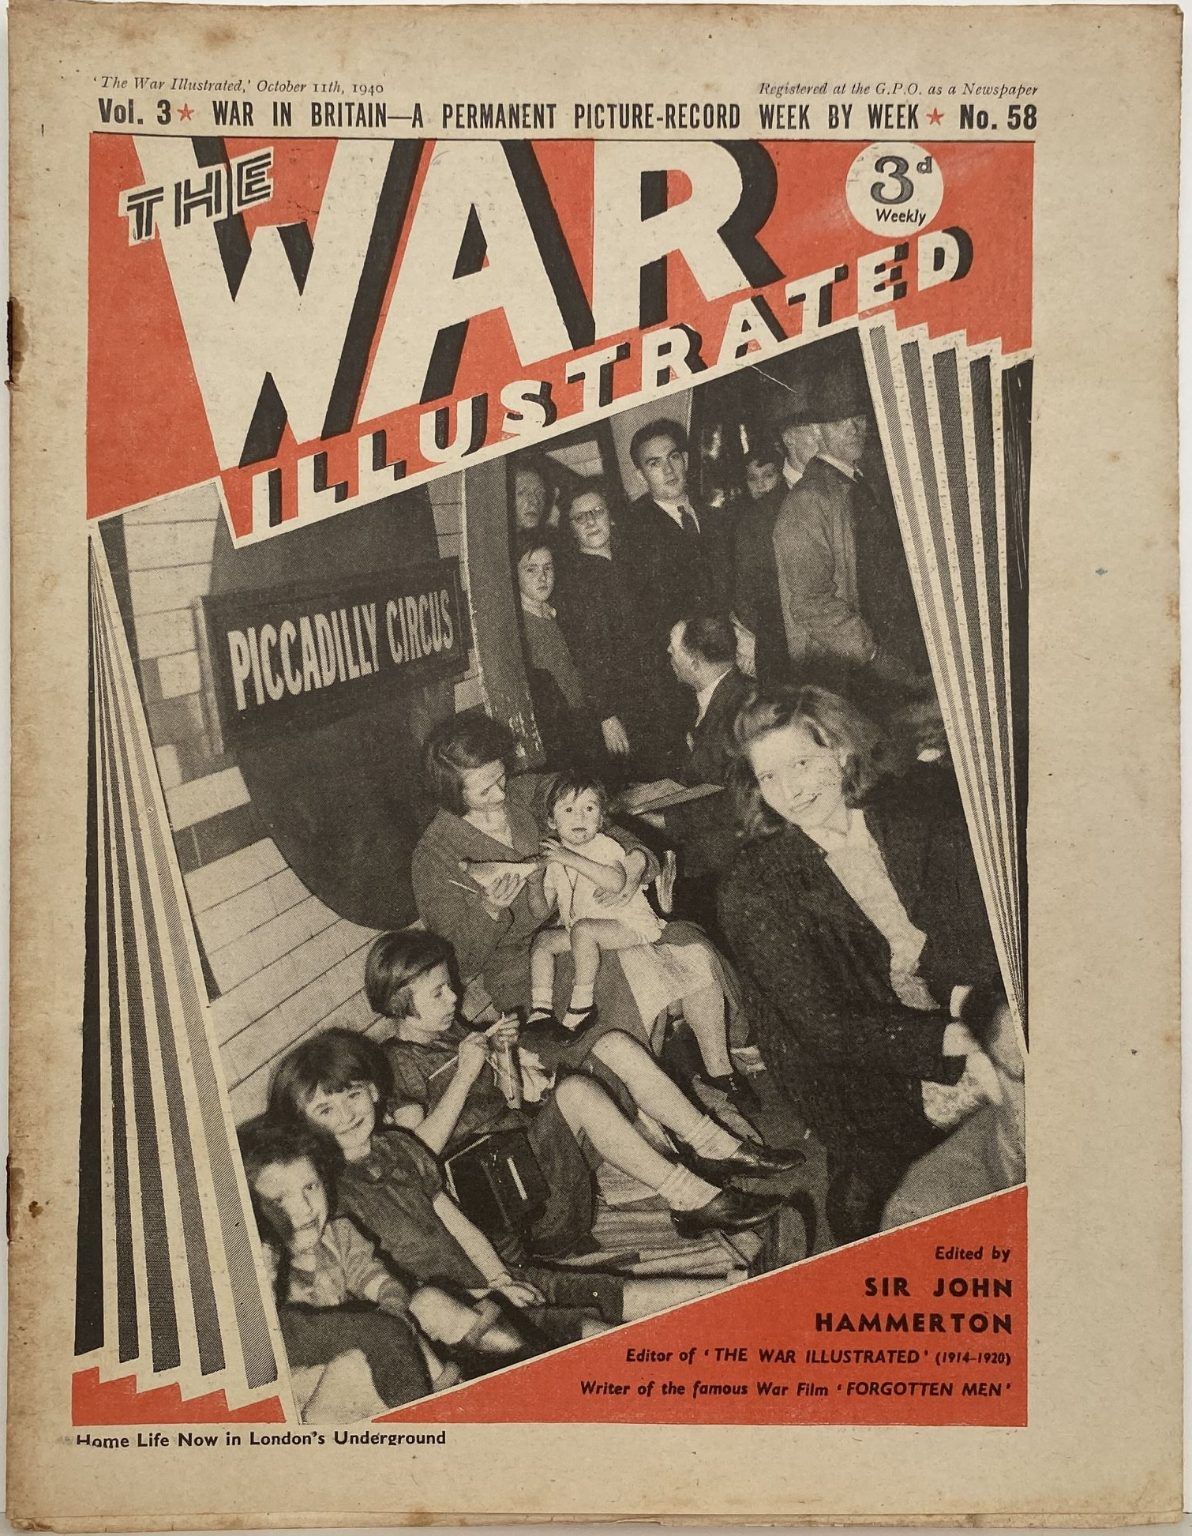 THE WAR ILLUSTRATED - Vol 3, No 58, 11th Oct 1940